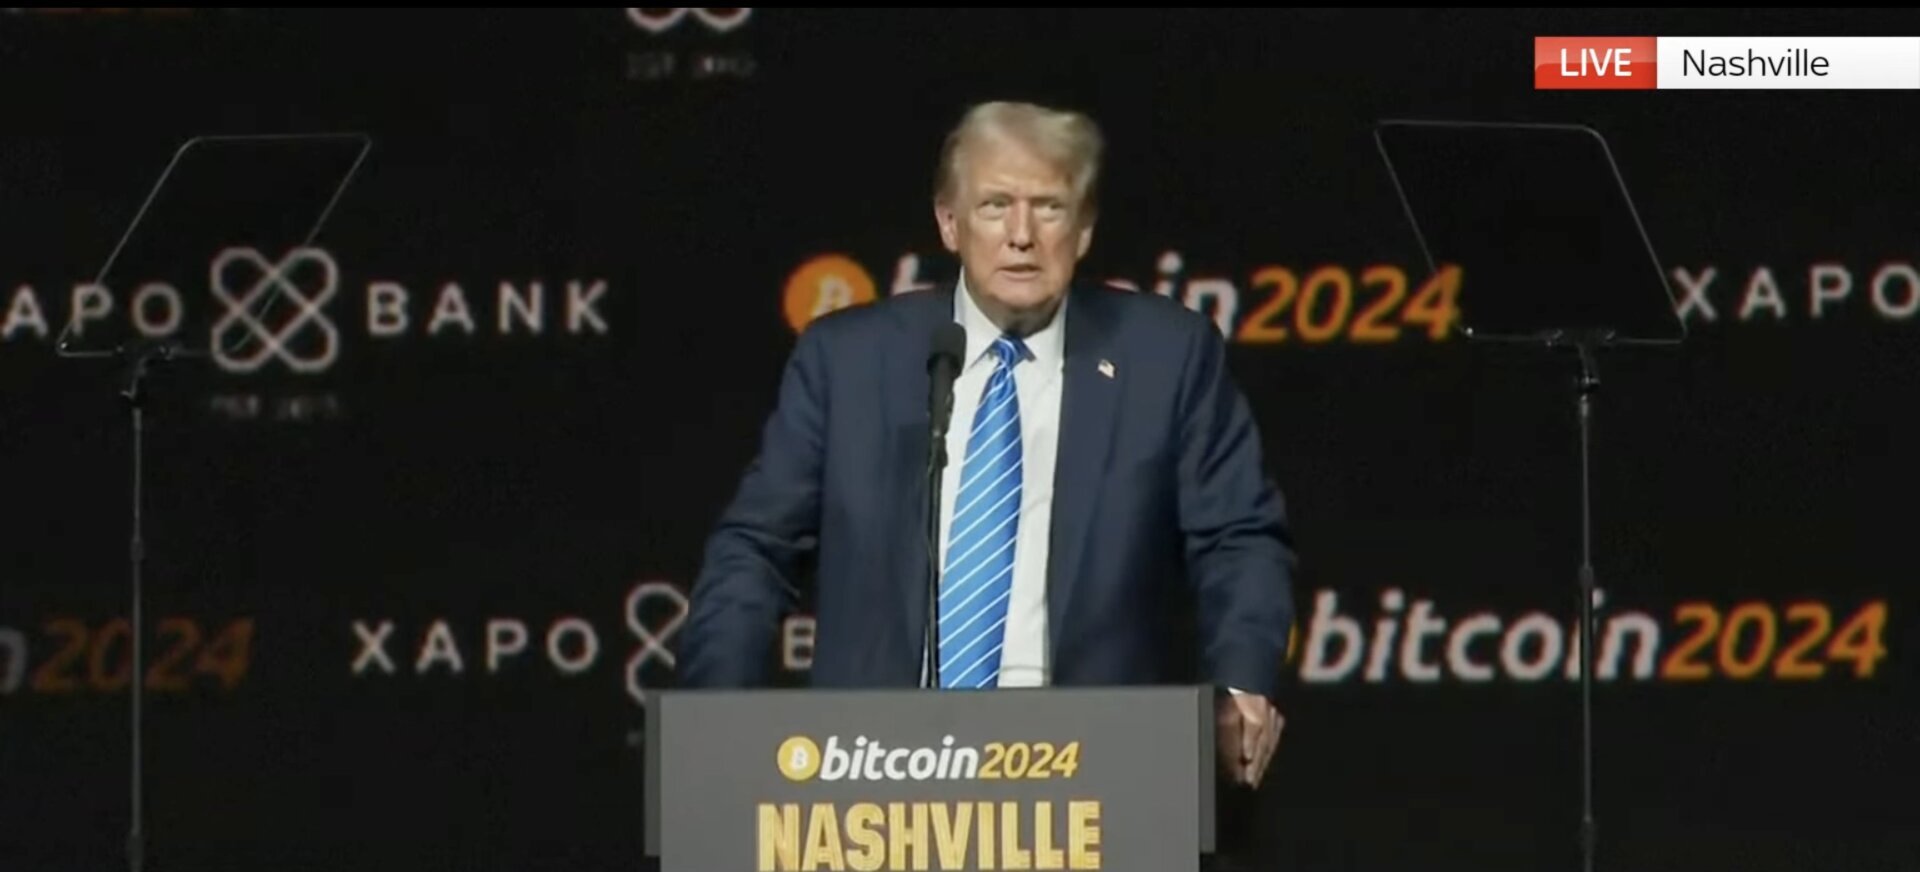 Trump Promises to Make U.S. the 'Crypto Capital of the Planet and the Bitcoin Superpower'